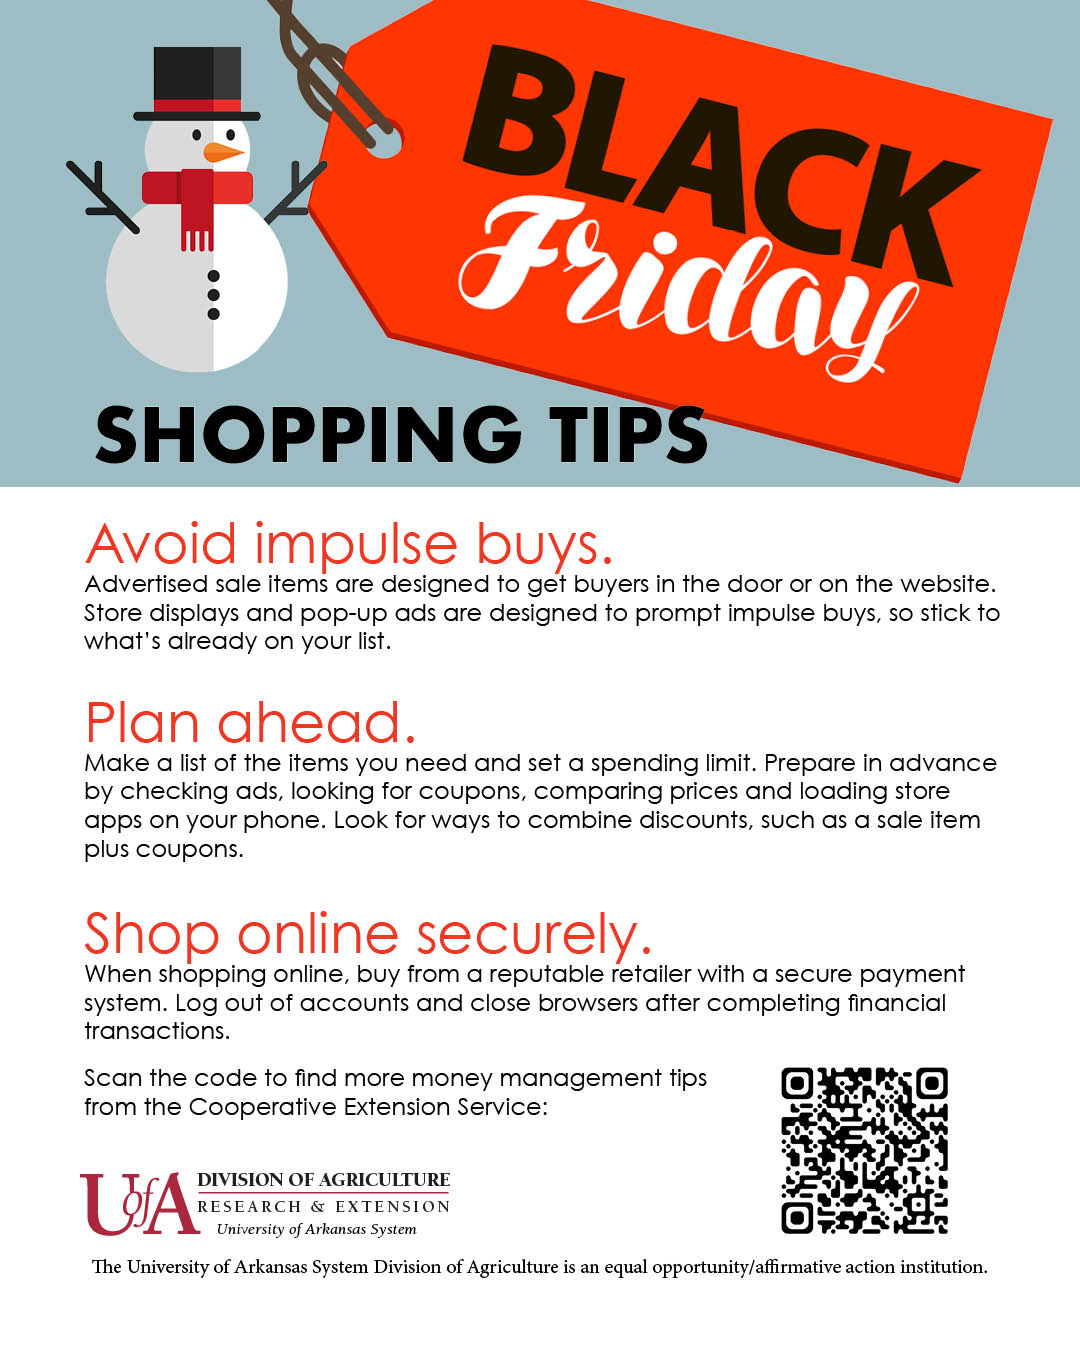 Infographic listing shopping tips. Tips include avoid impulse buys, plan ahead and shop online securely.